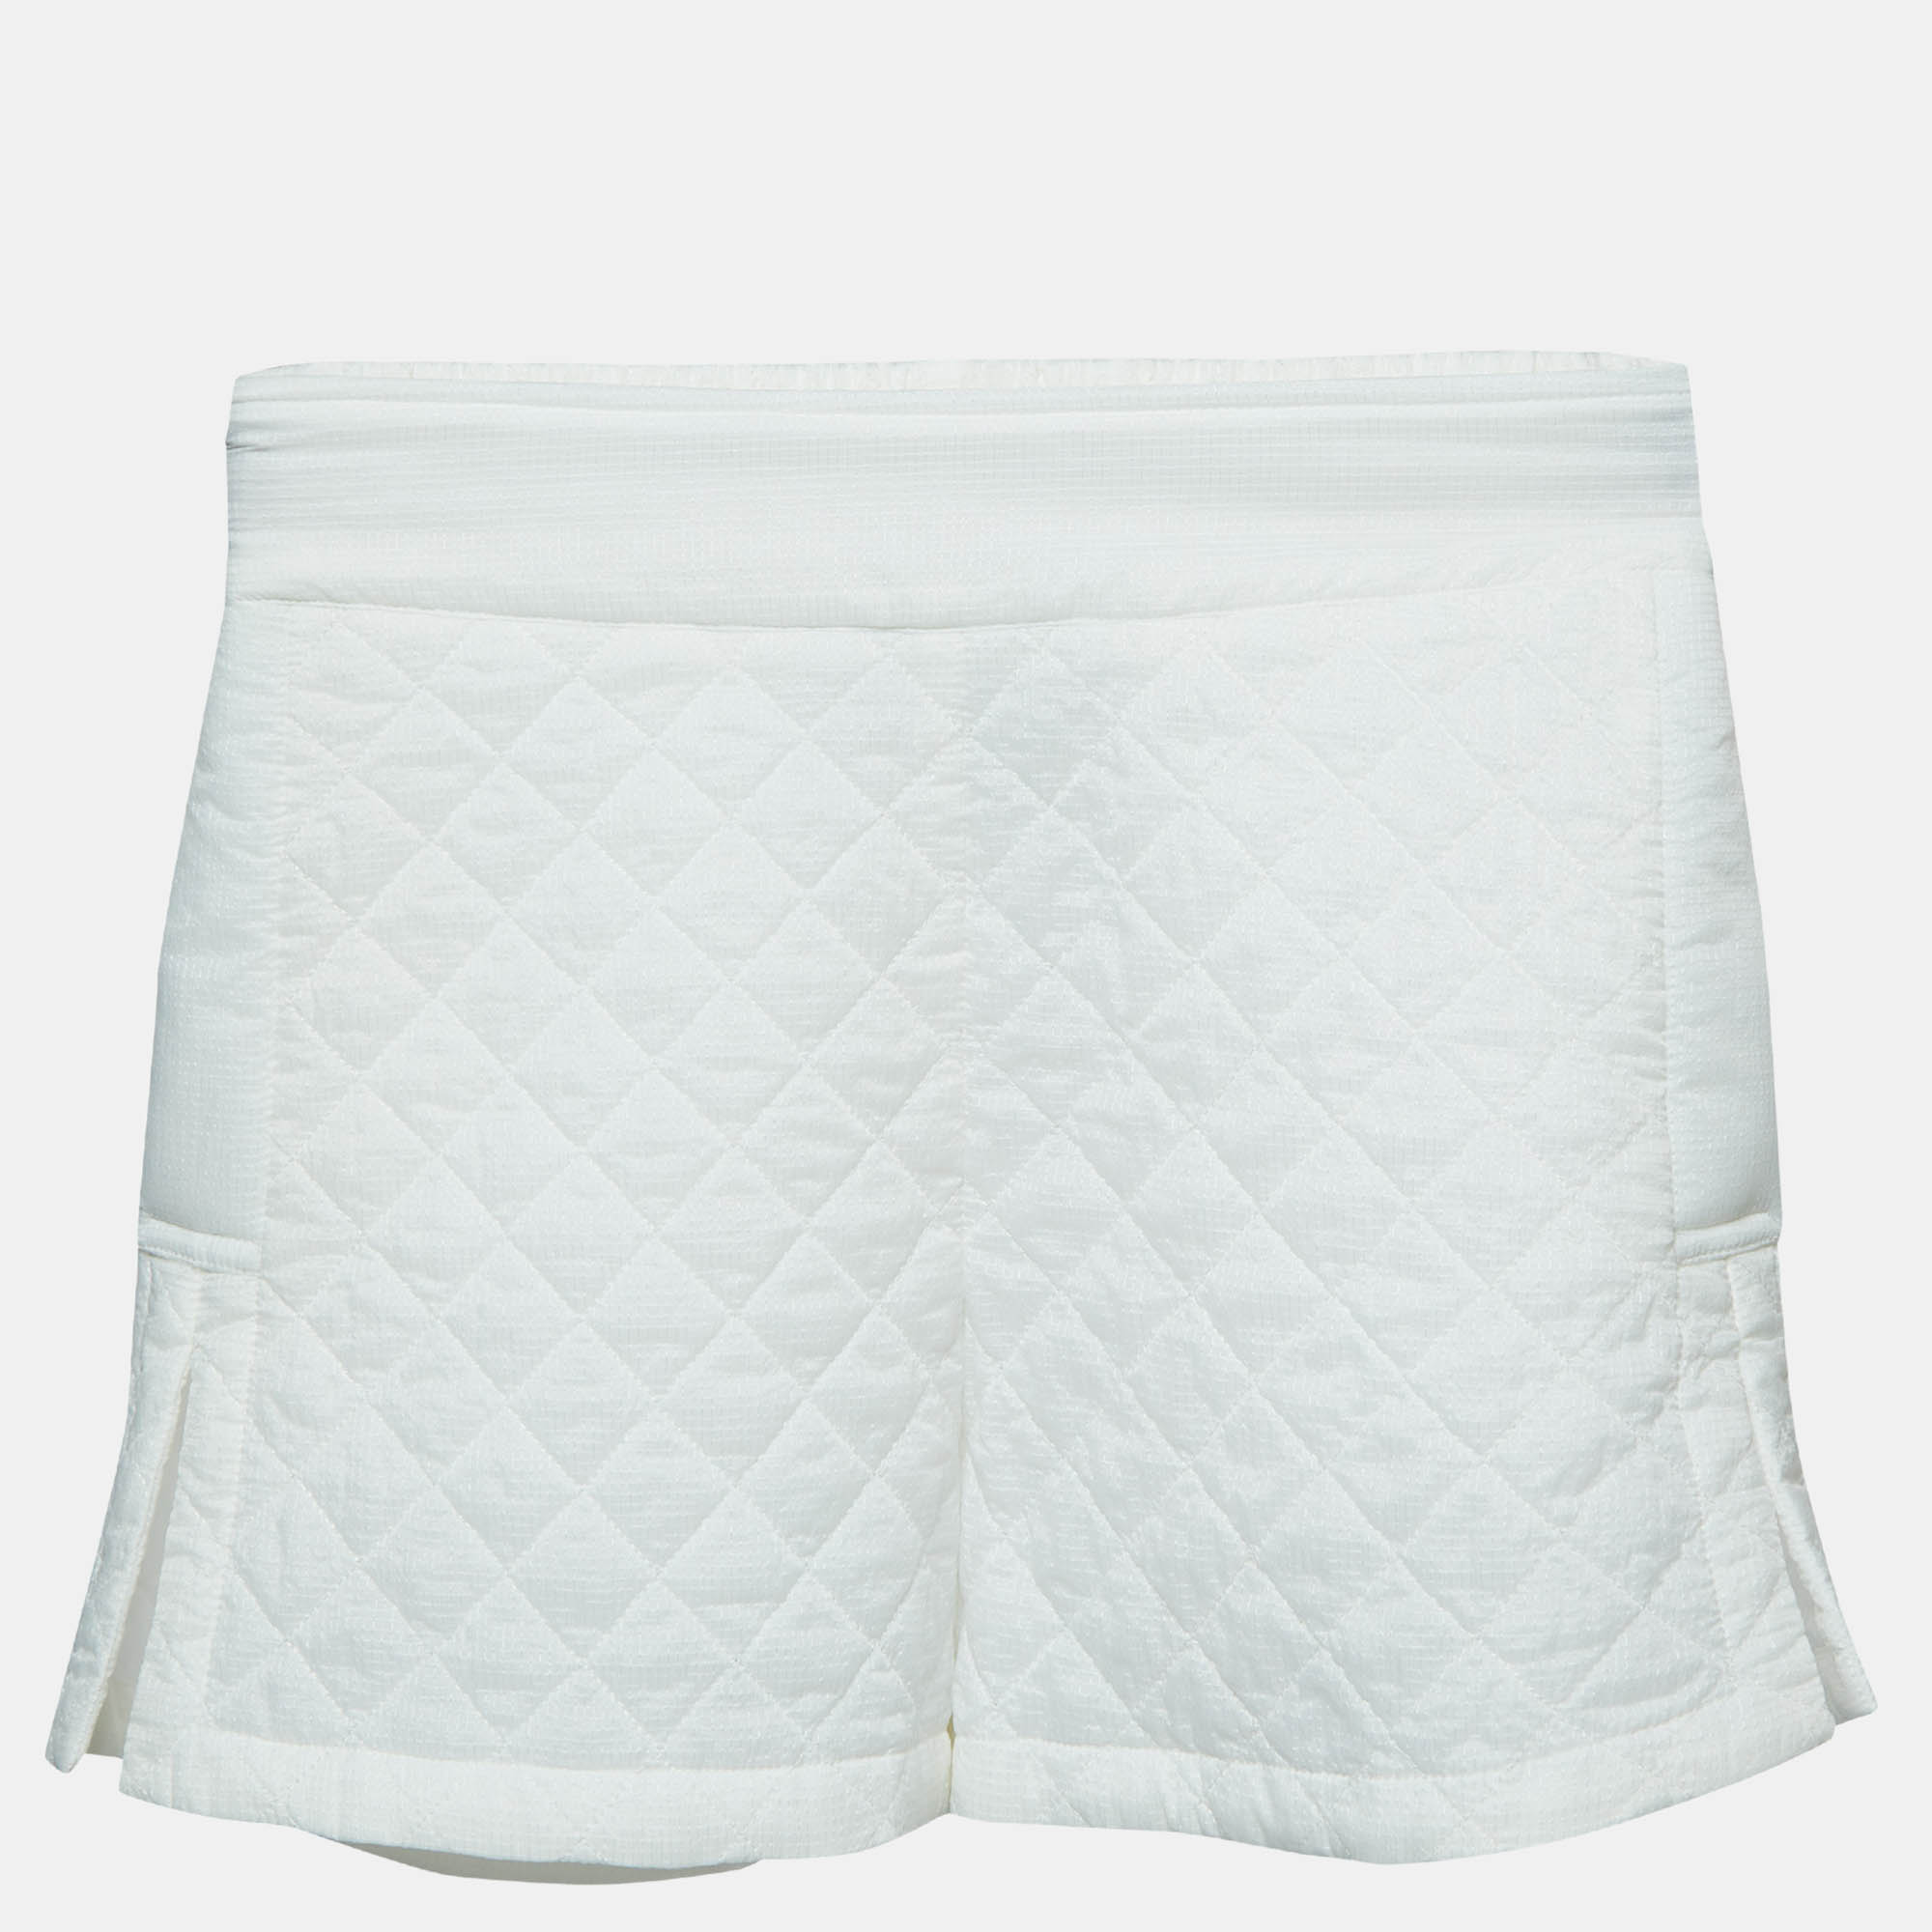 Chanel white synthetic quilted detail shorts s